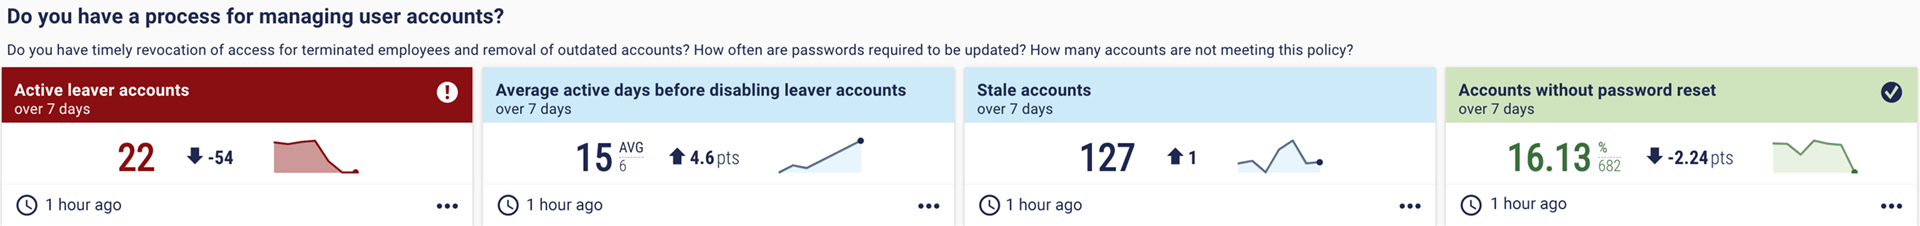 Dashboard: Do you have a process for managing user accounts